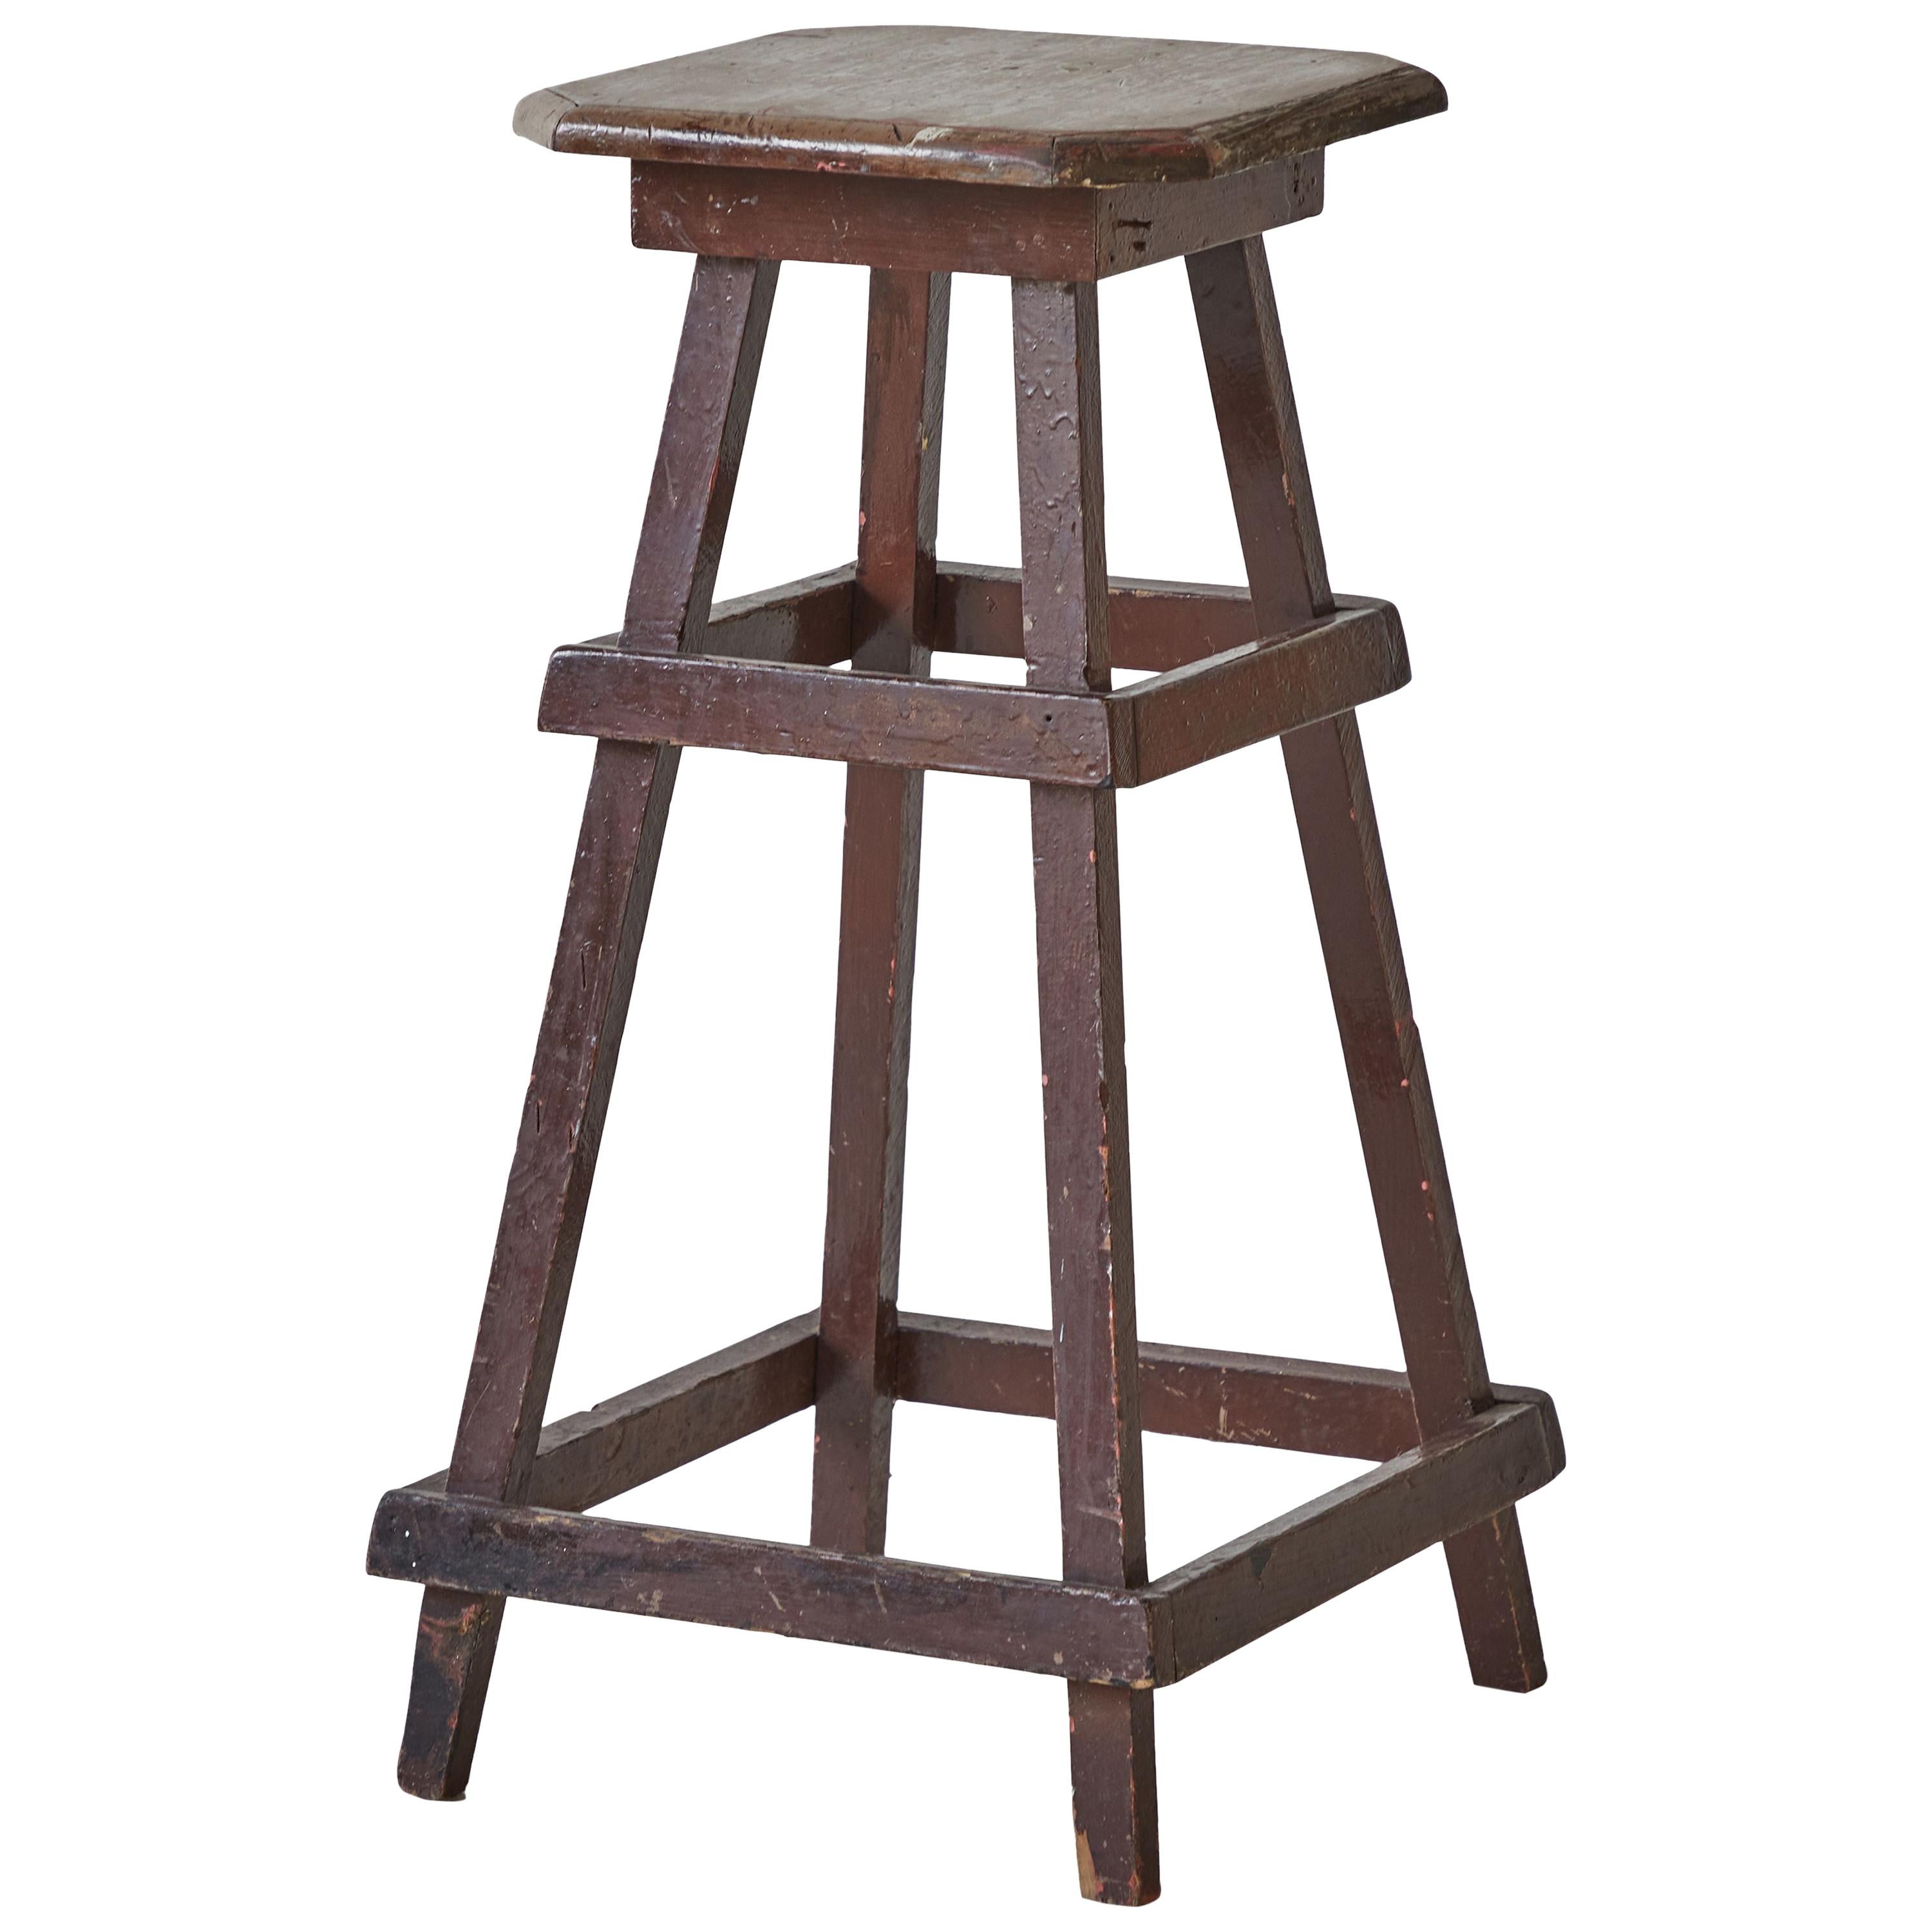 Early American Rustic Squared Stool